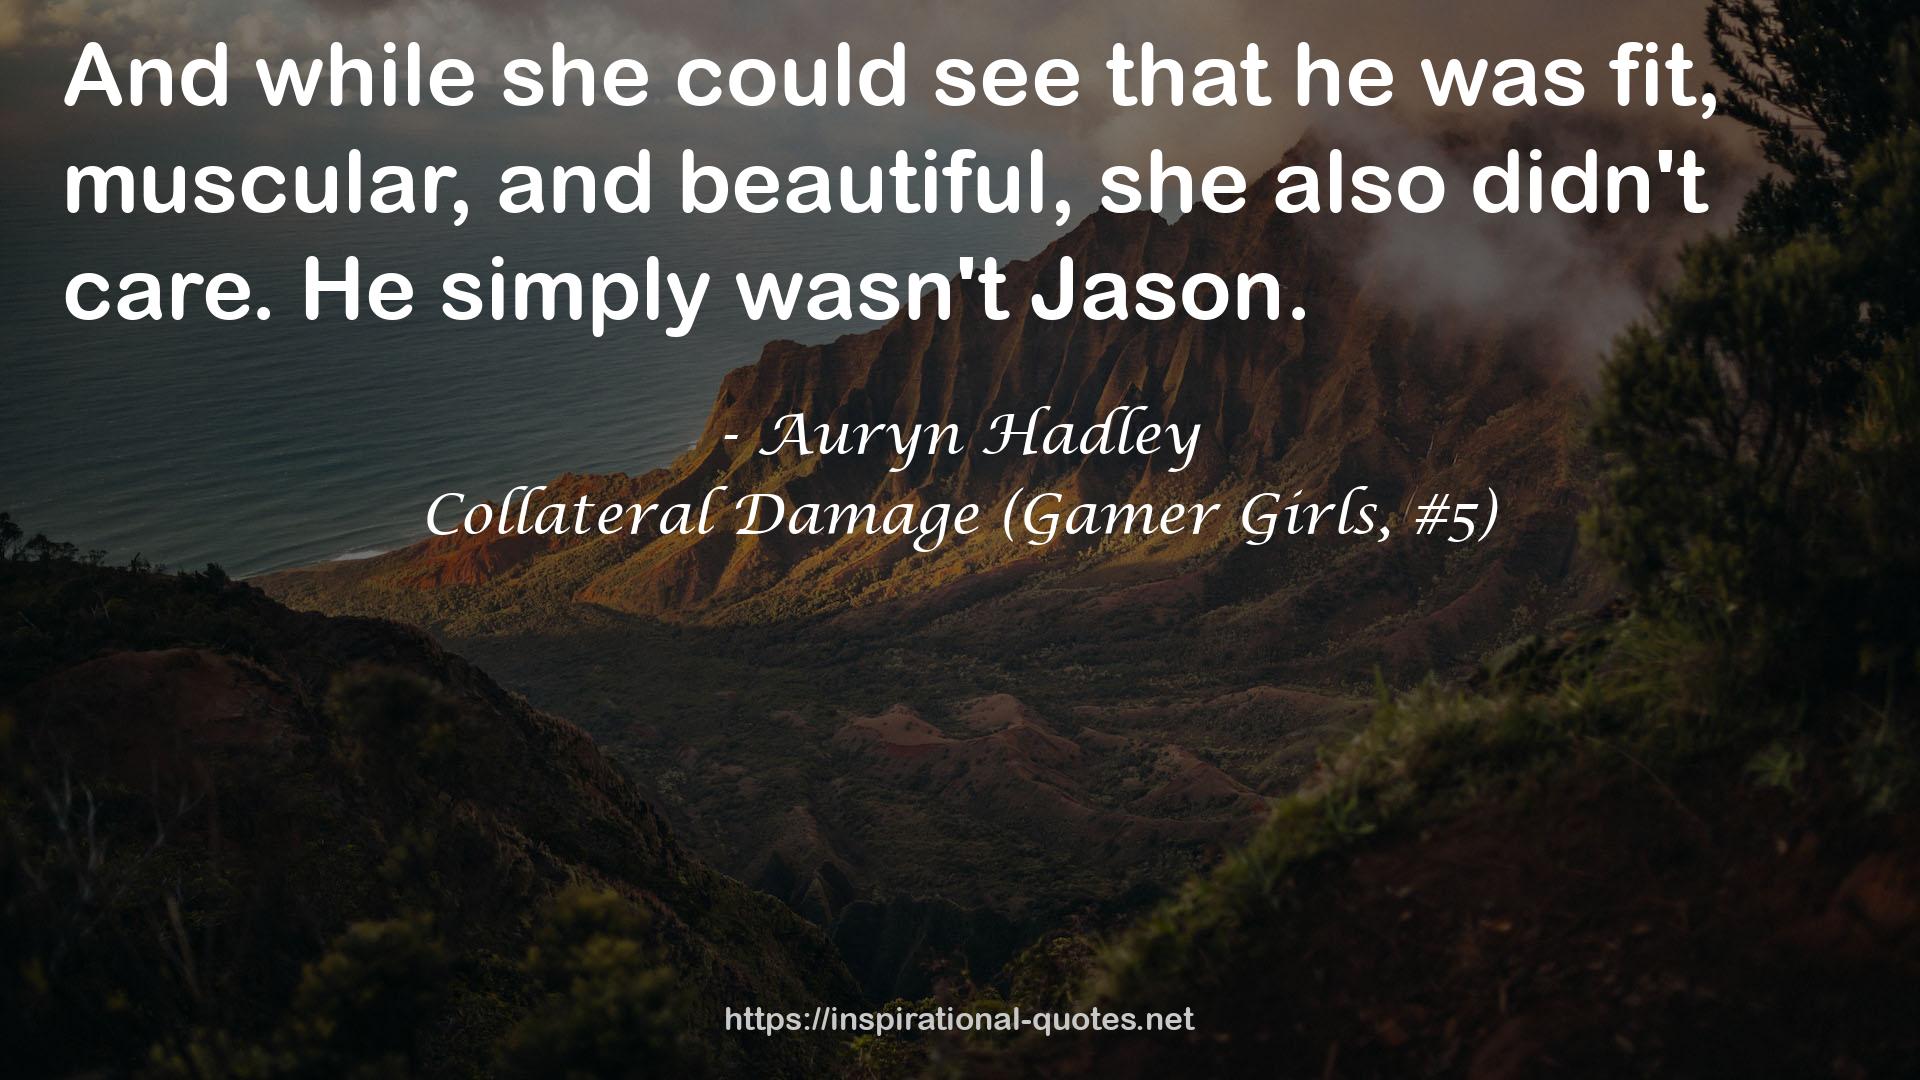 Collateral Damage (Gamer Girls, #5) QUOTES